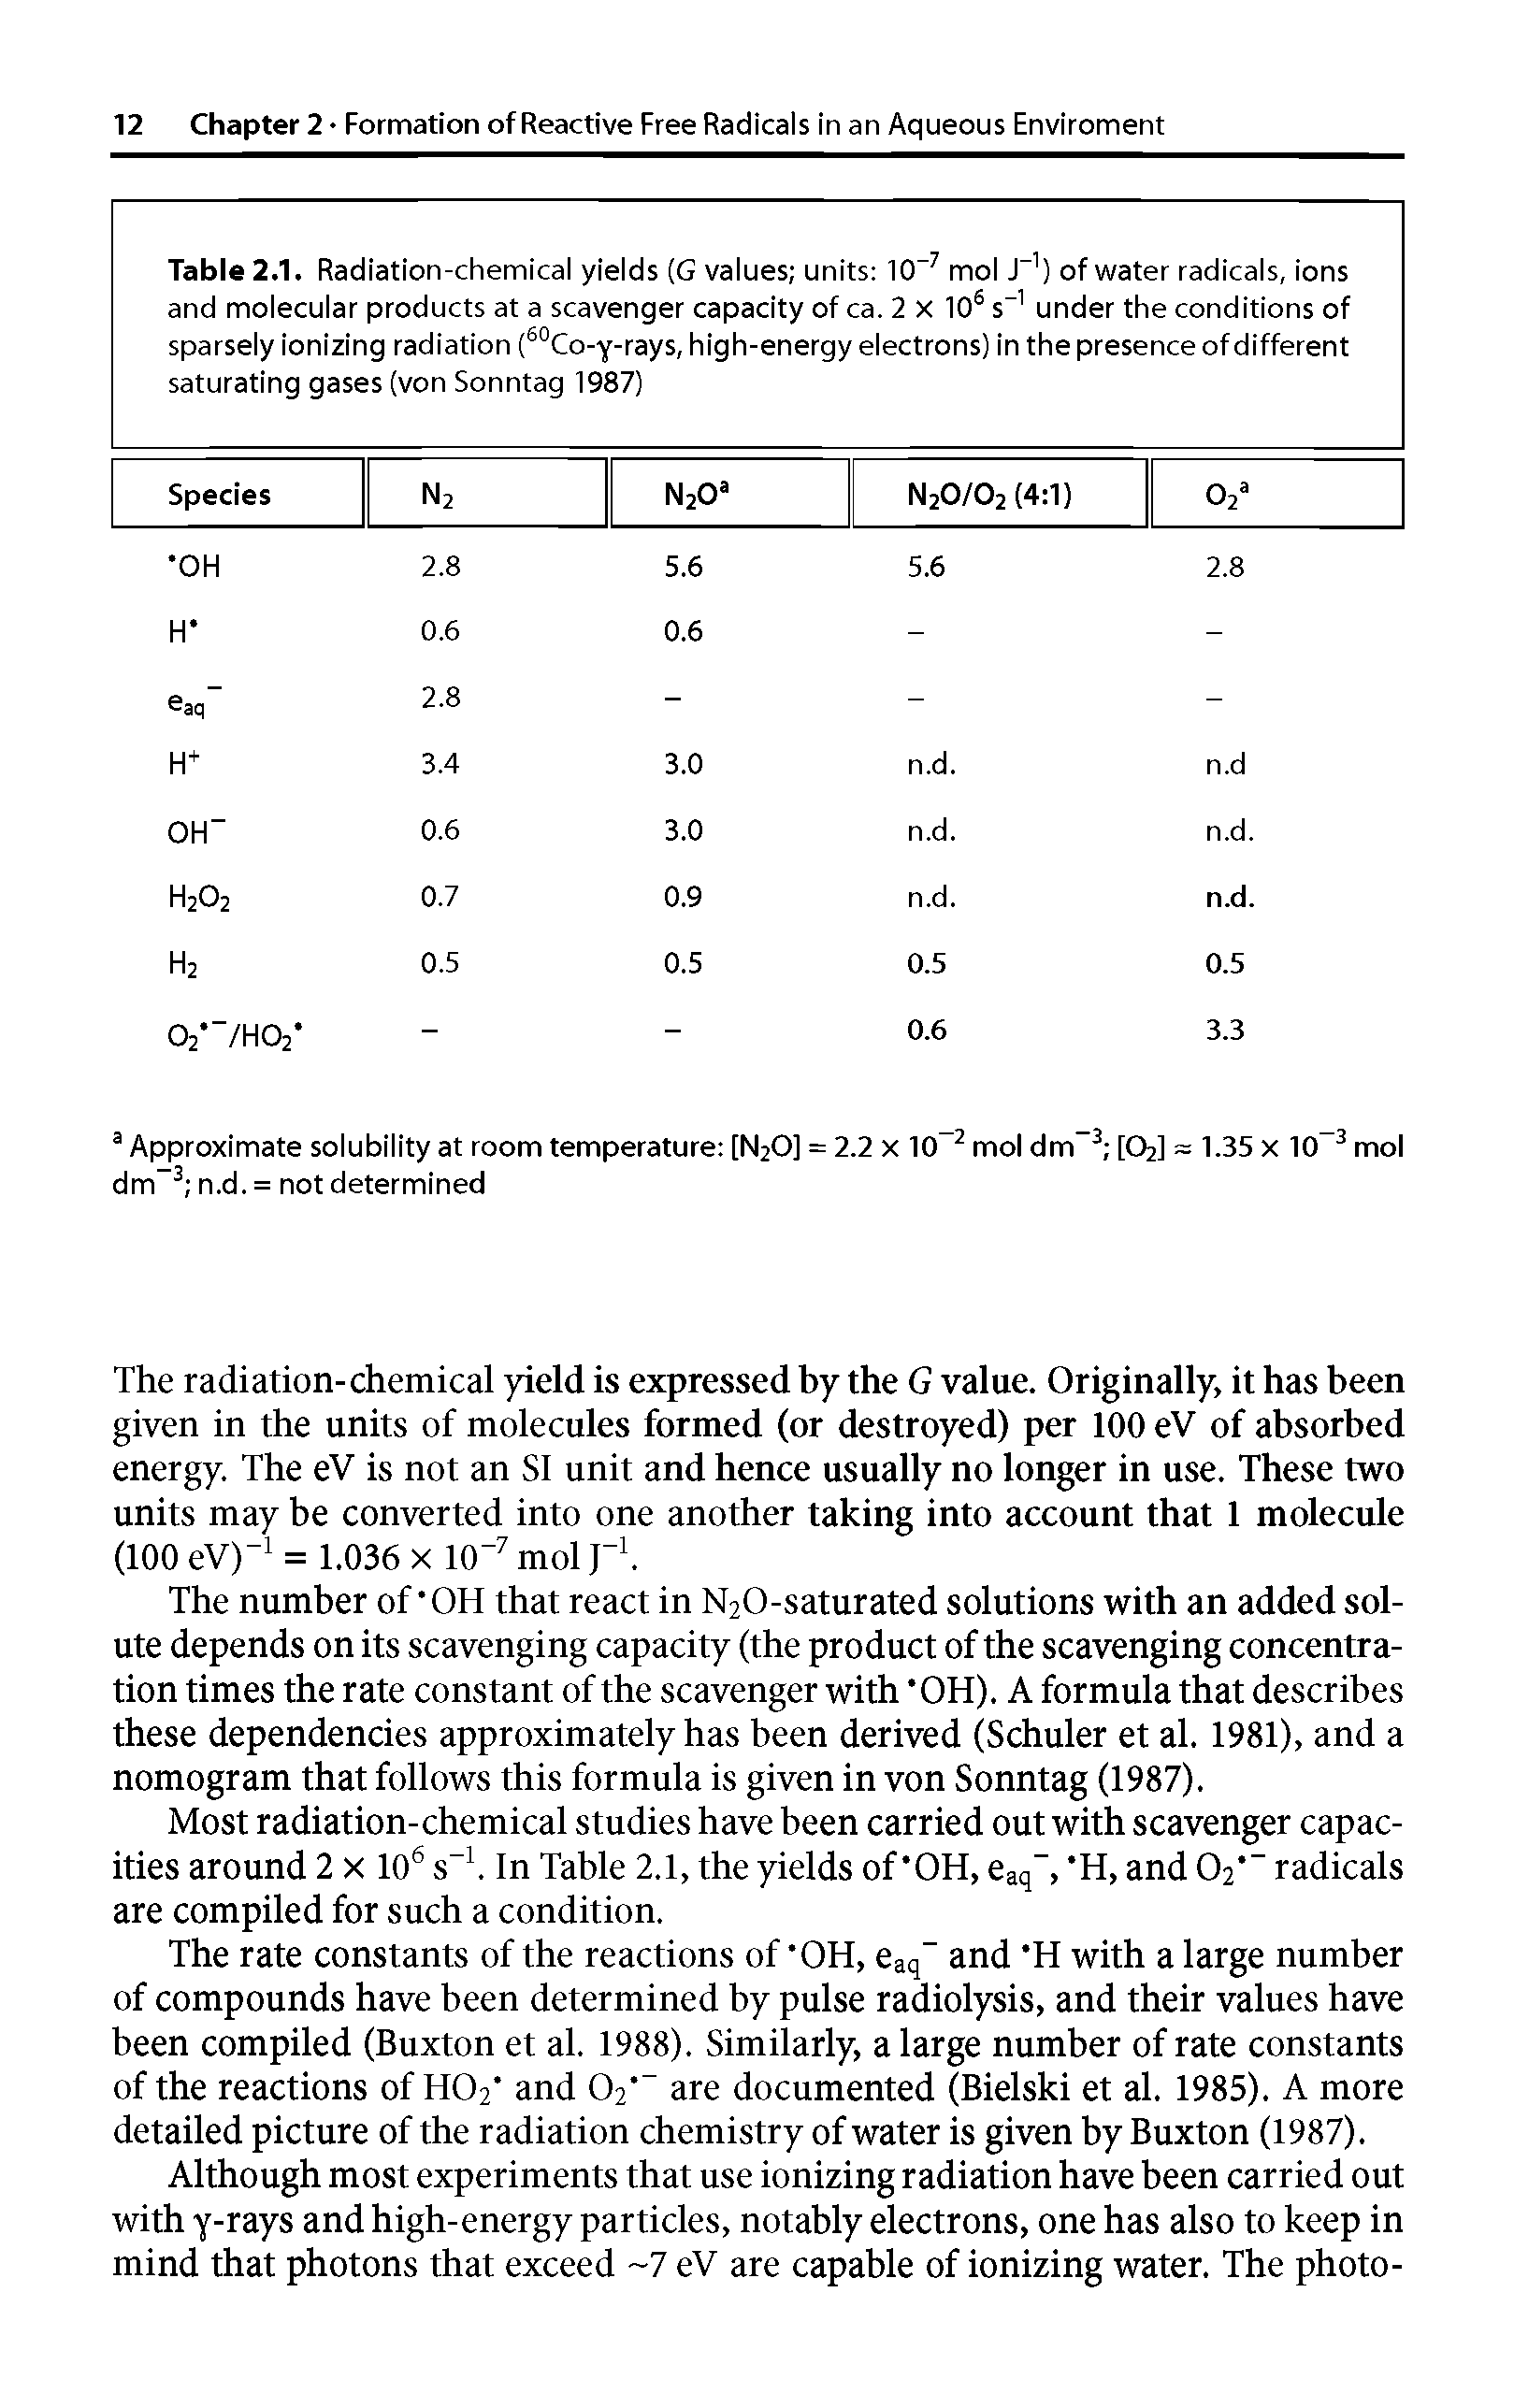 Table 2.1. Radiation-chemical yields (G values units 10-7 mol J-1) of water radicals, ions and molecular products at a scavenger capacity of ca. 2 x 10s s-1 under the conditions of sparsely ionizing radiation (60Co-y-rays, high-energy electrons) in the presence of different saturating gases (von Sonntag 1987)...